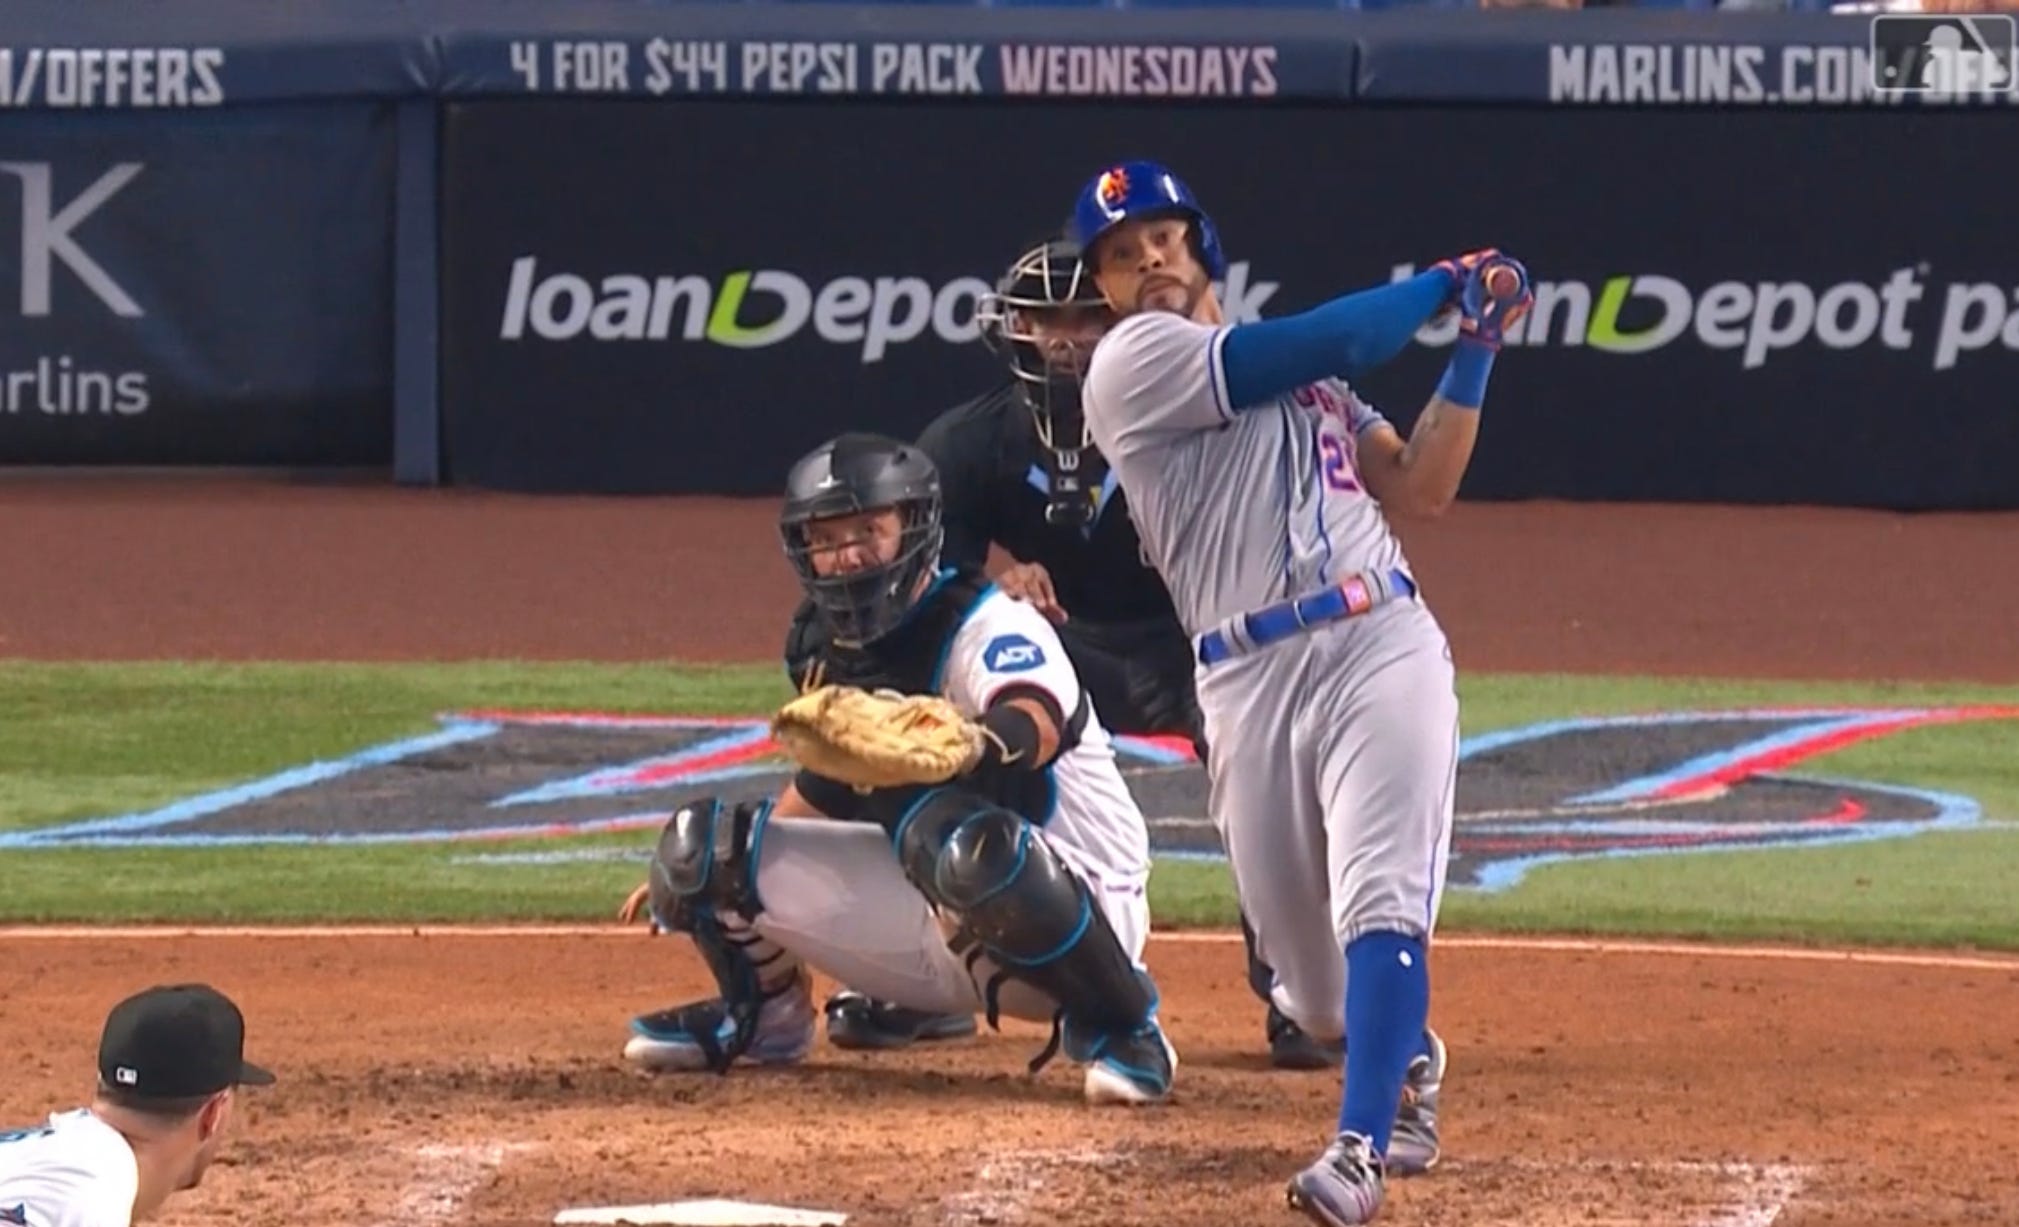 Tommy Pham's new lenses paying off for Mets